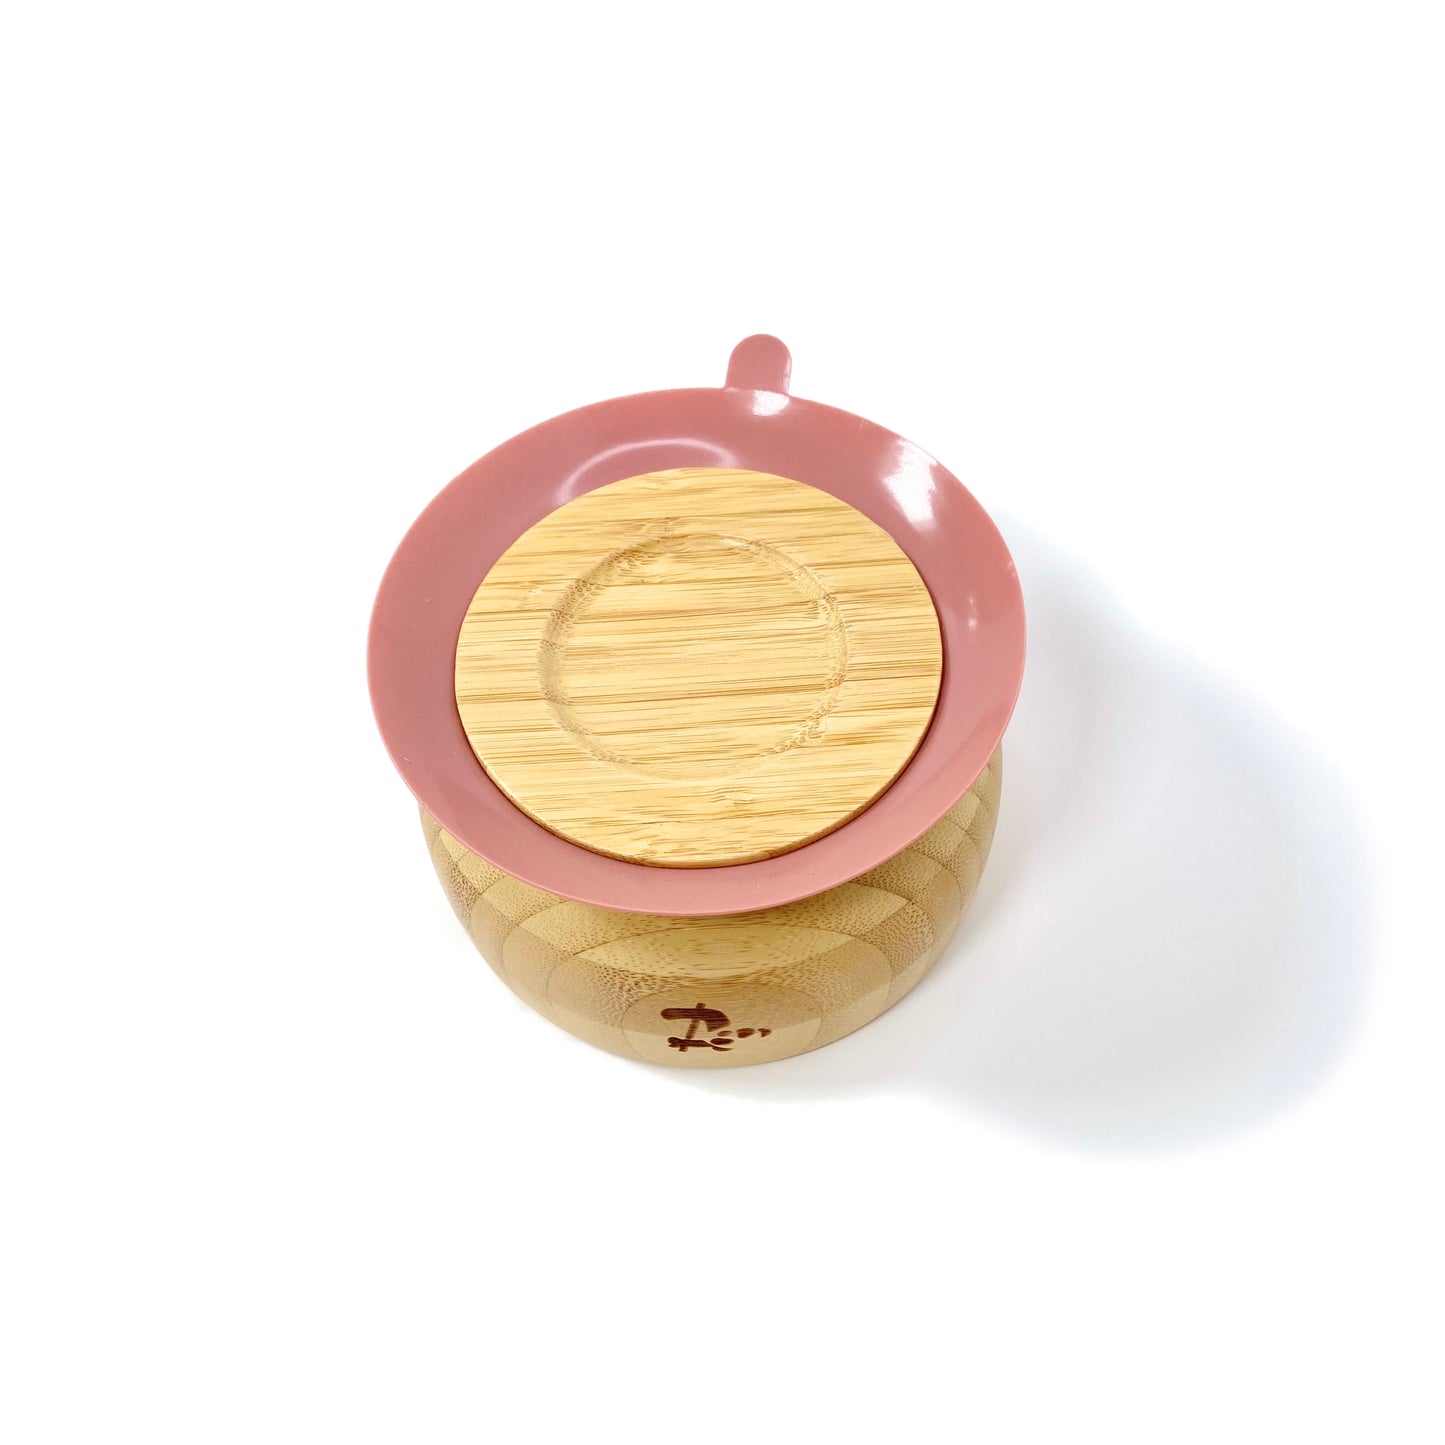 A children’s bamboo bowl with a blush pink silicone suction ring. Image shows the underside of the bowl, featuring the silicone suction ring.